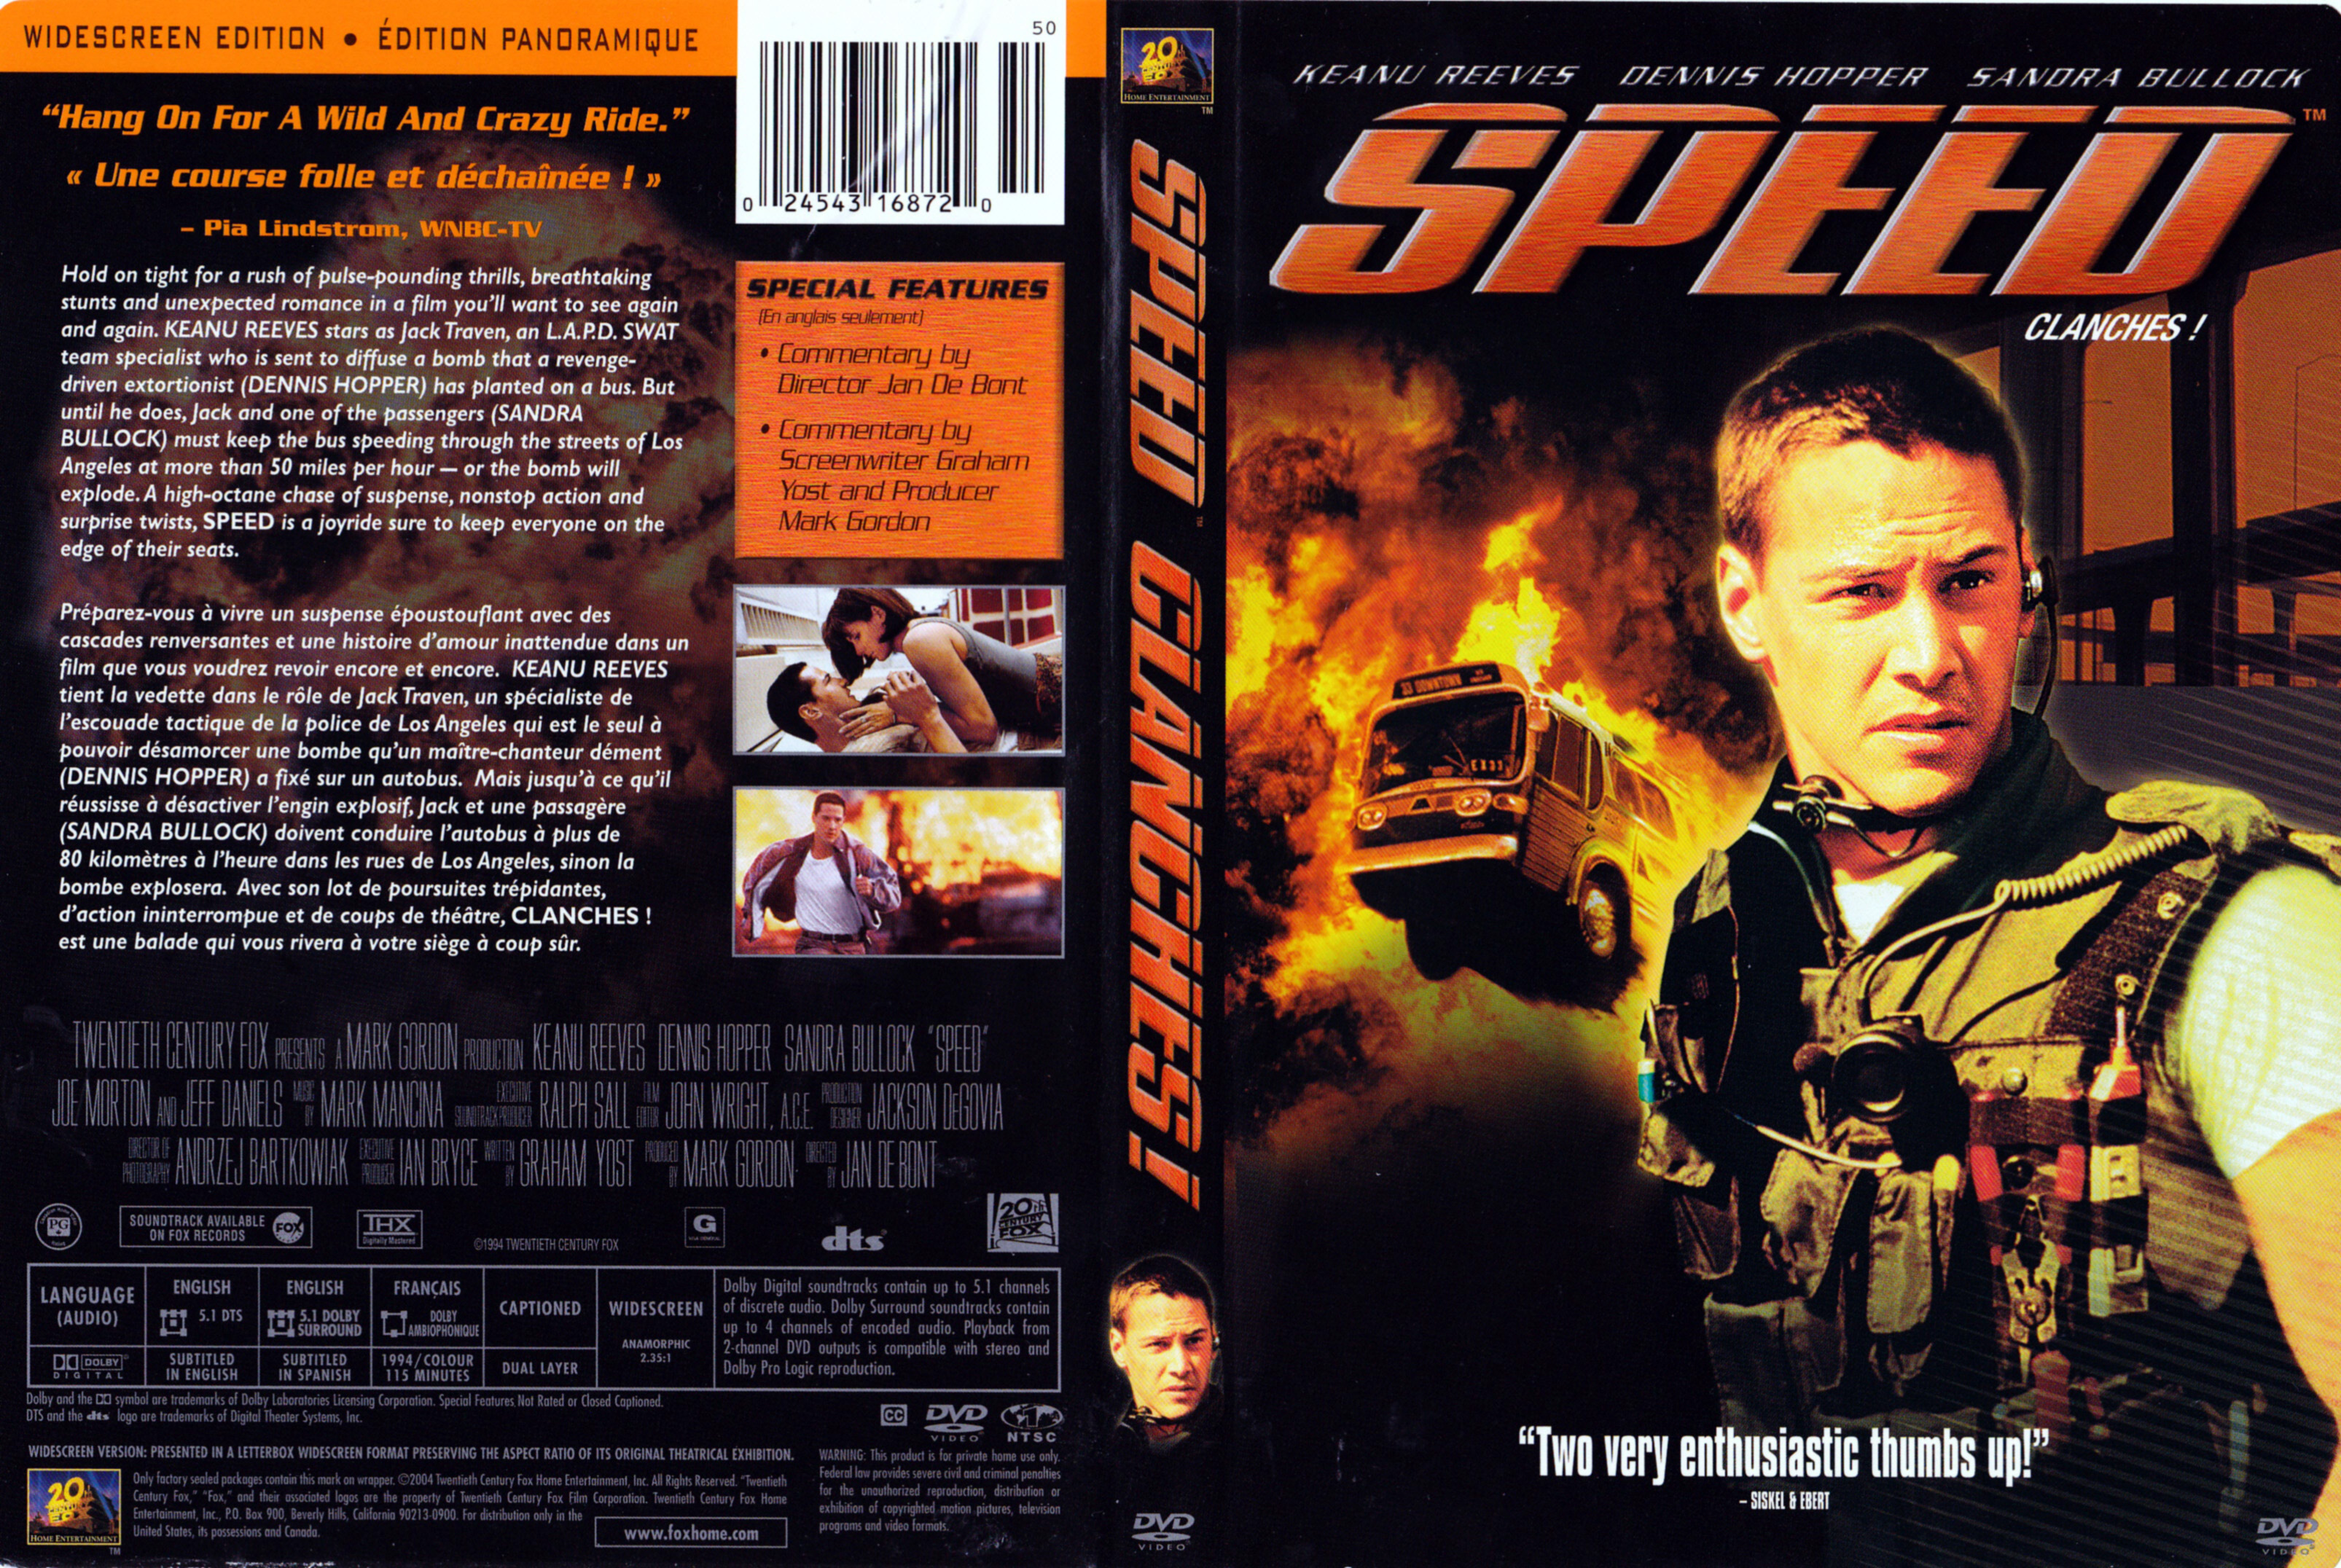 Jaquette DVD Clanches - Speed (Canadienne)